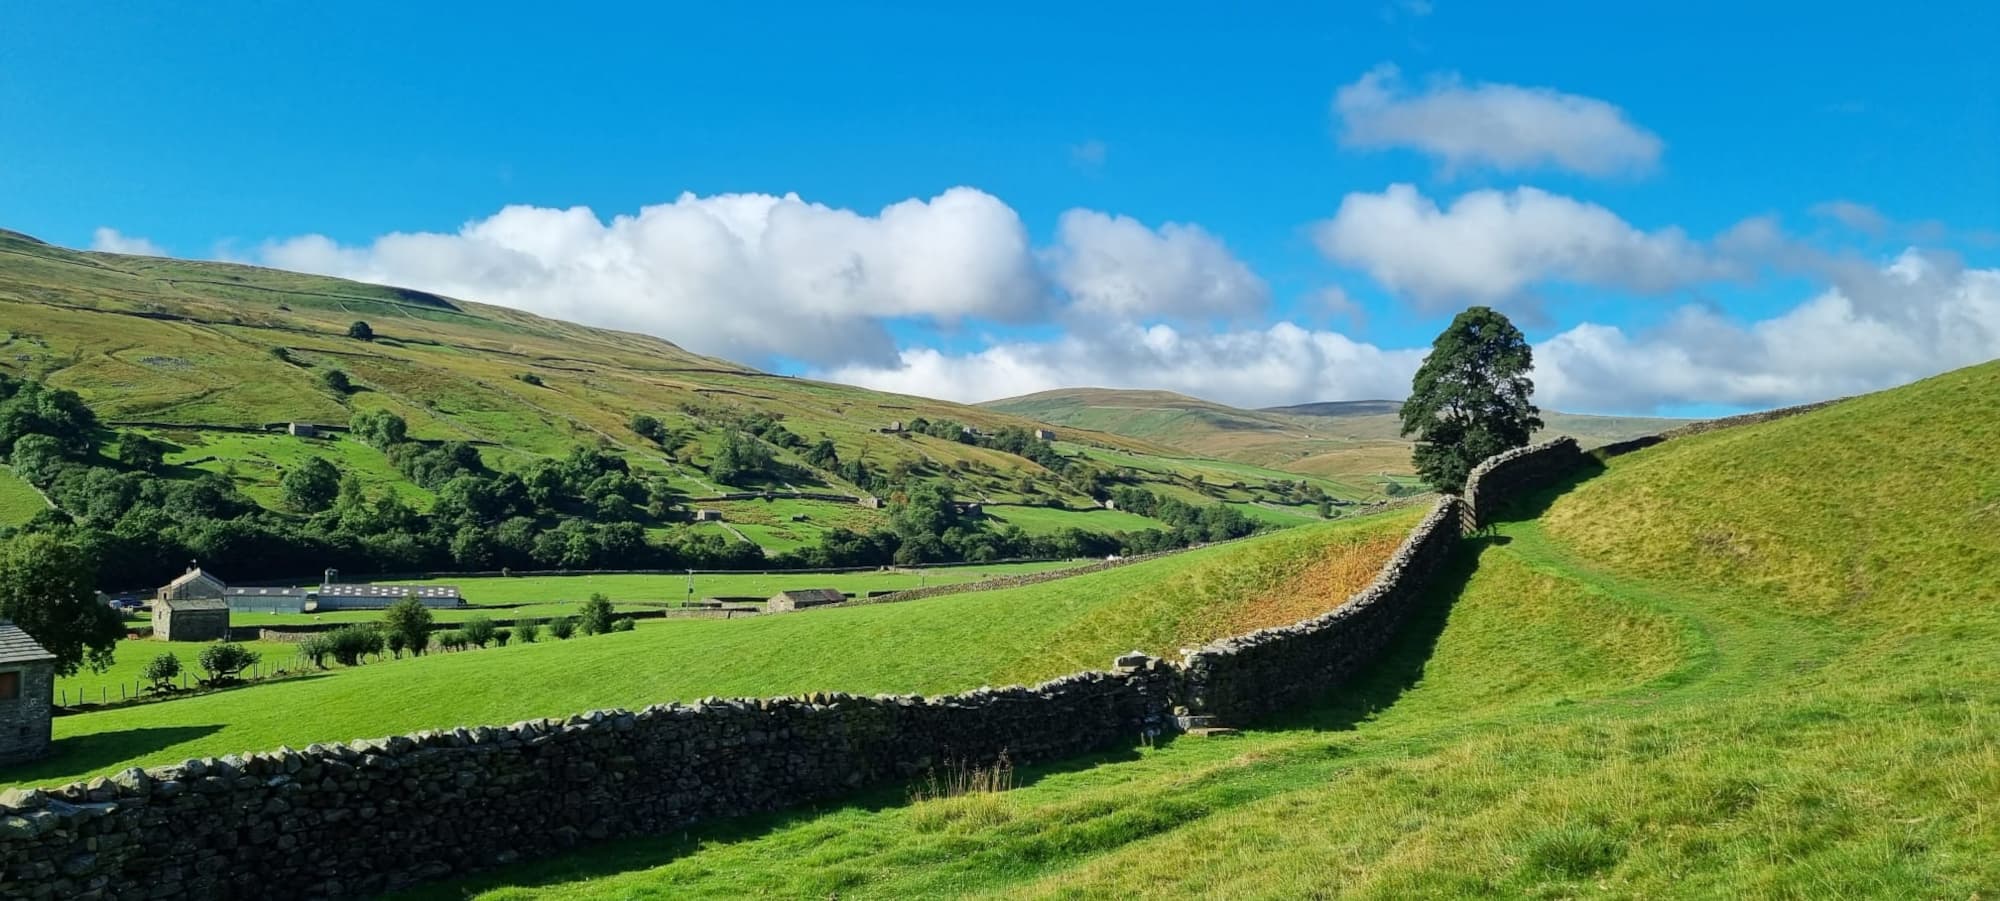 walking-in-the-yorkshire-dales